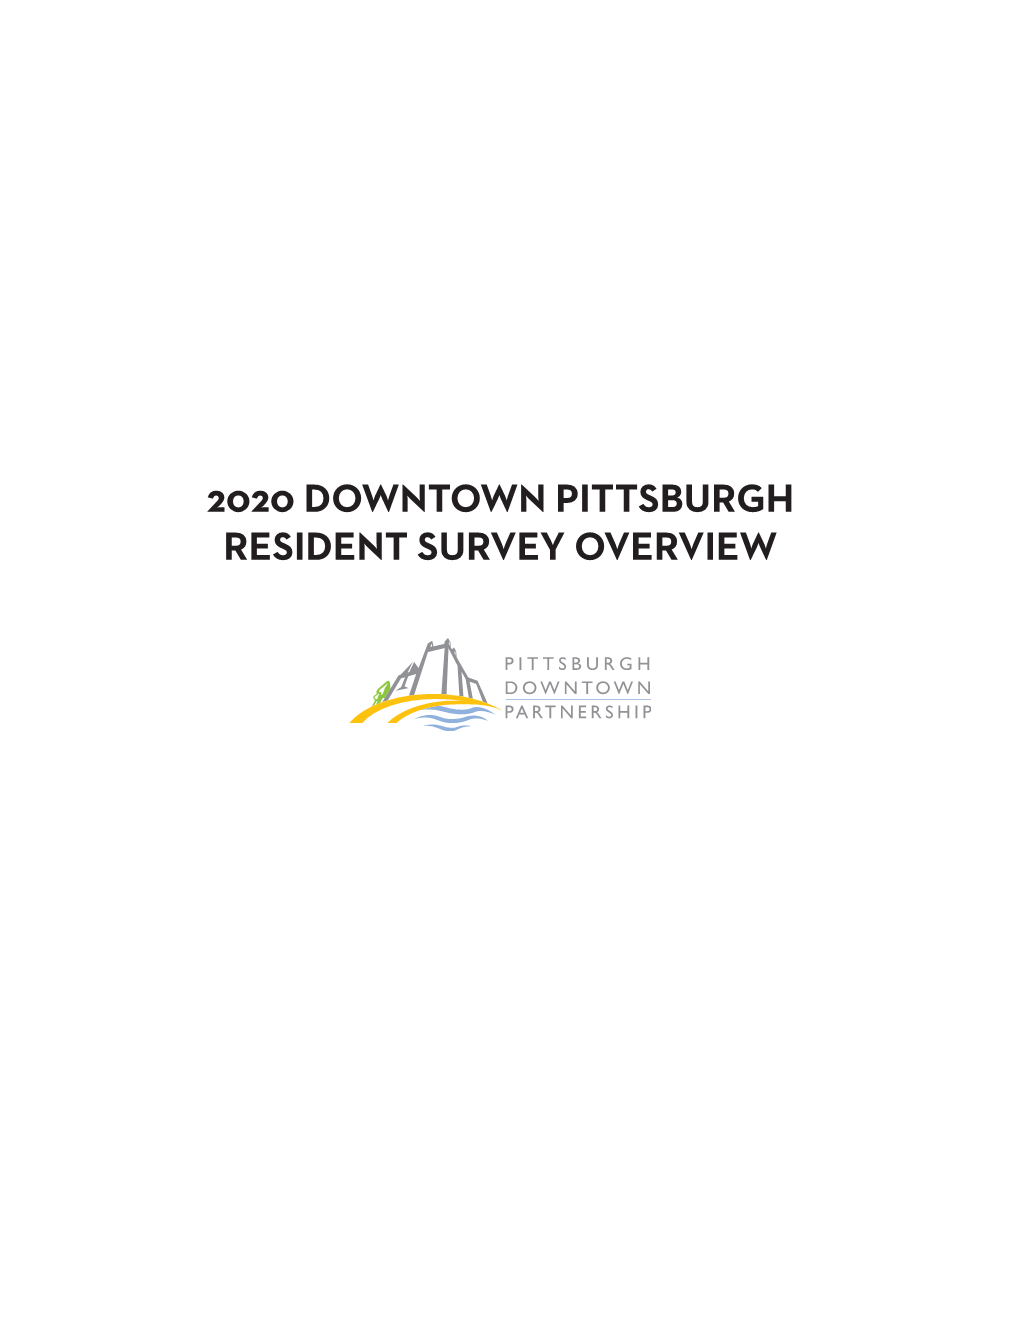 2020 Downtown Pittsburgh Resident Survey Overview About the Survey